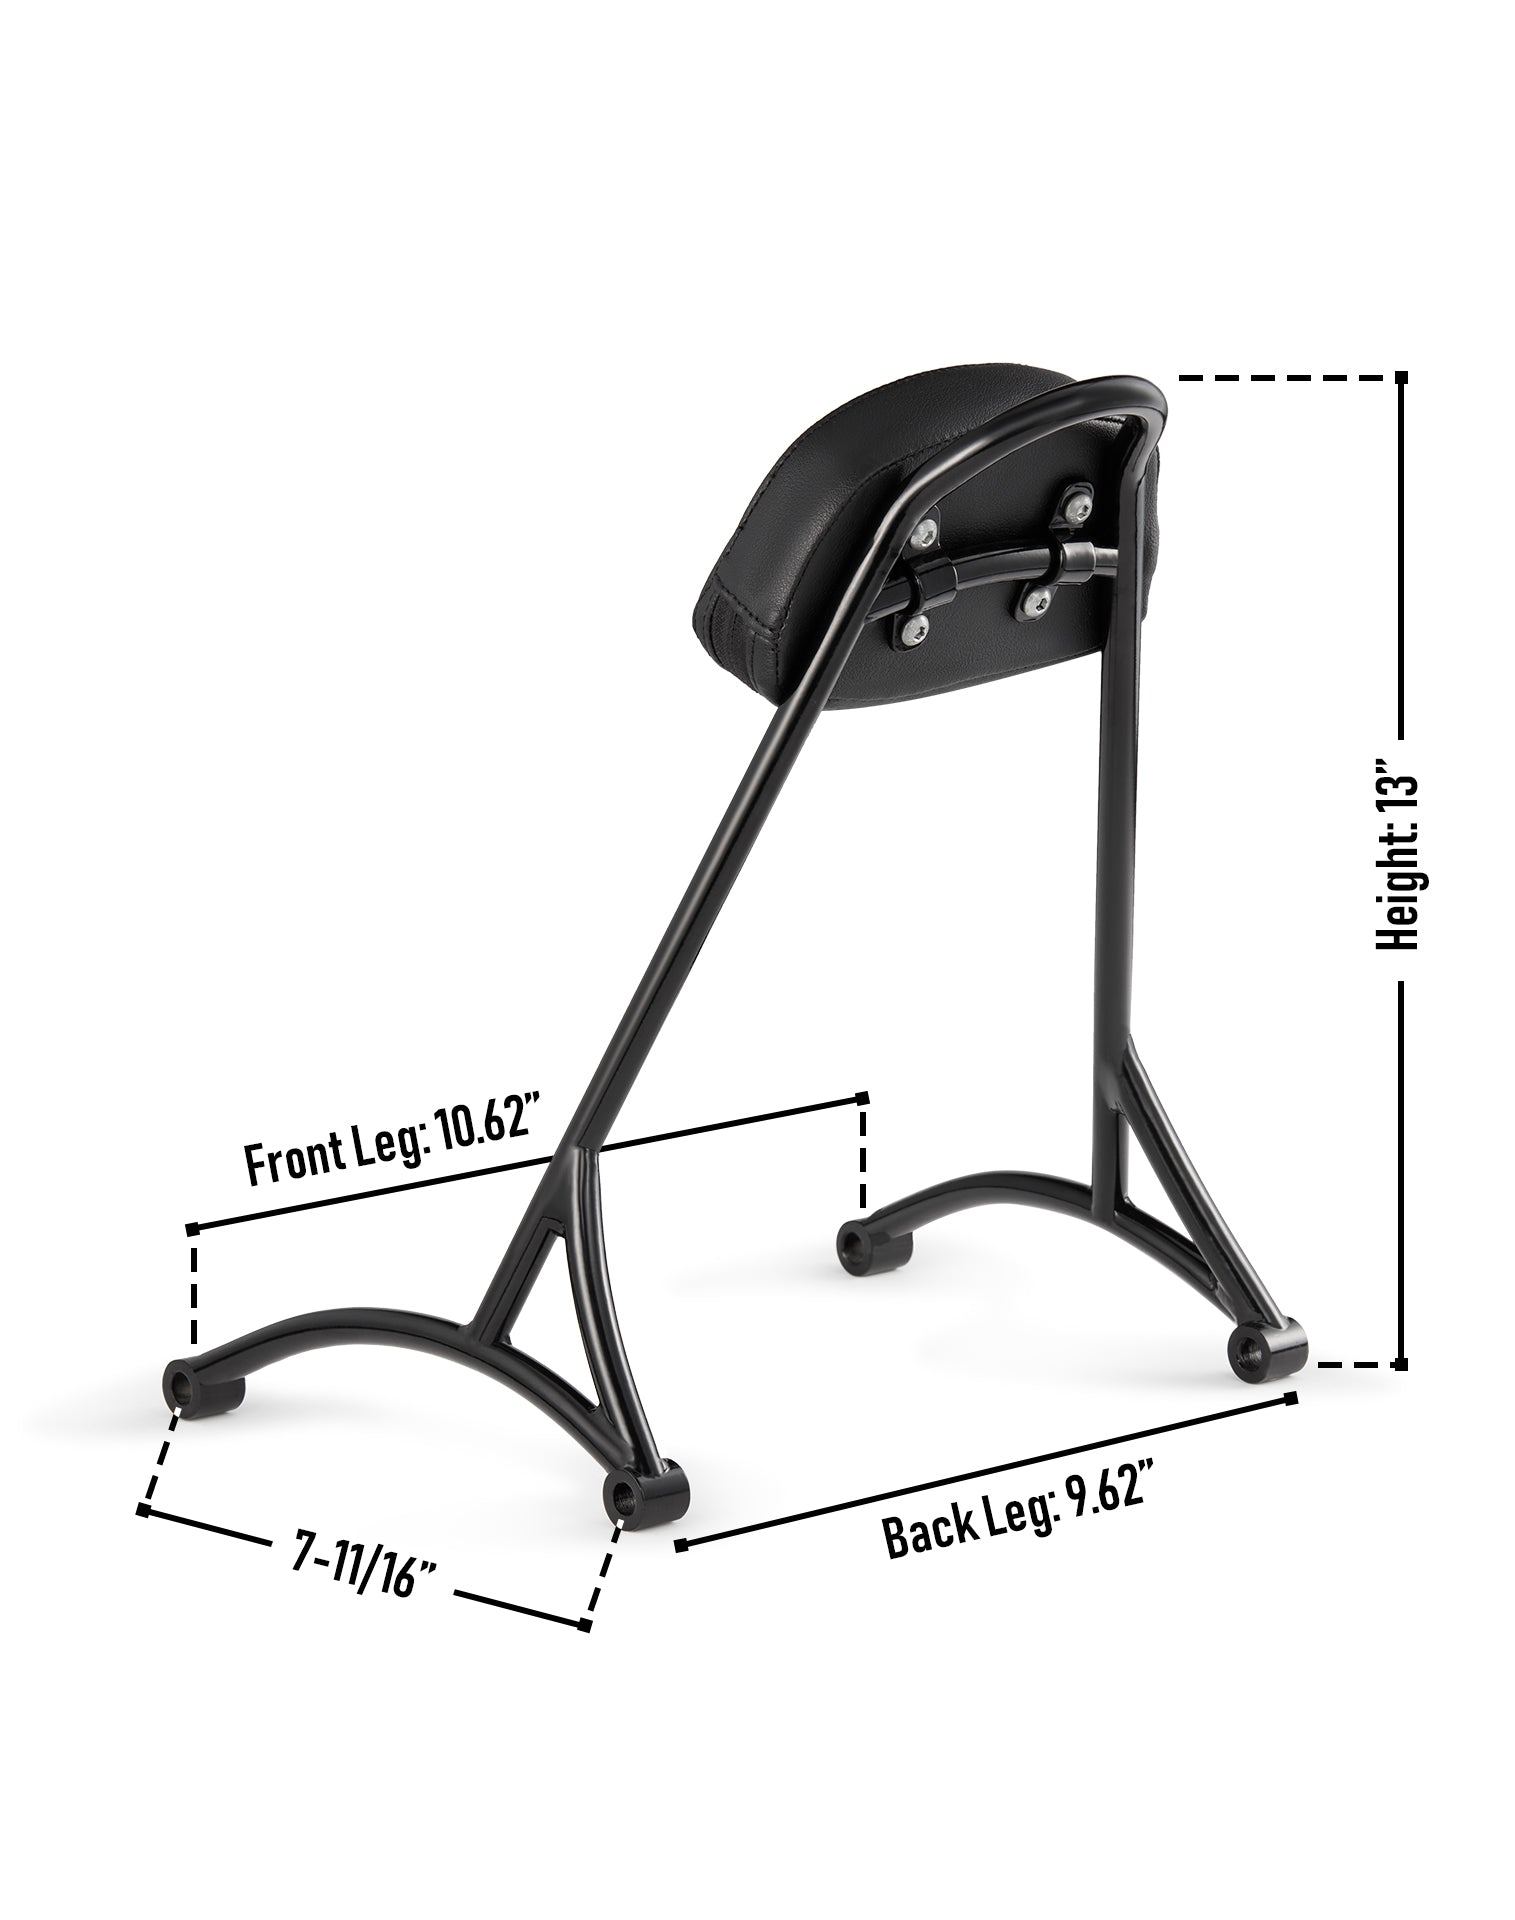 Viking Iron Born 13" Sissy Bar with Backrest Pad for Harley Sportster 1200 Nightster XL1200N Gloss Black Dimension